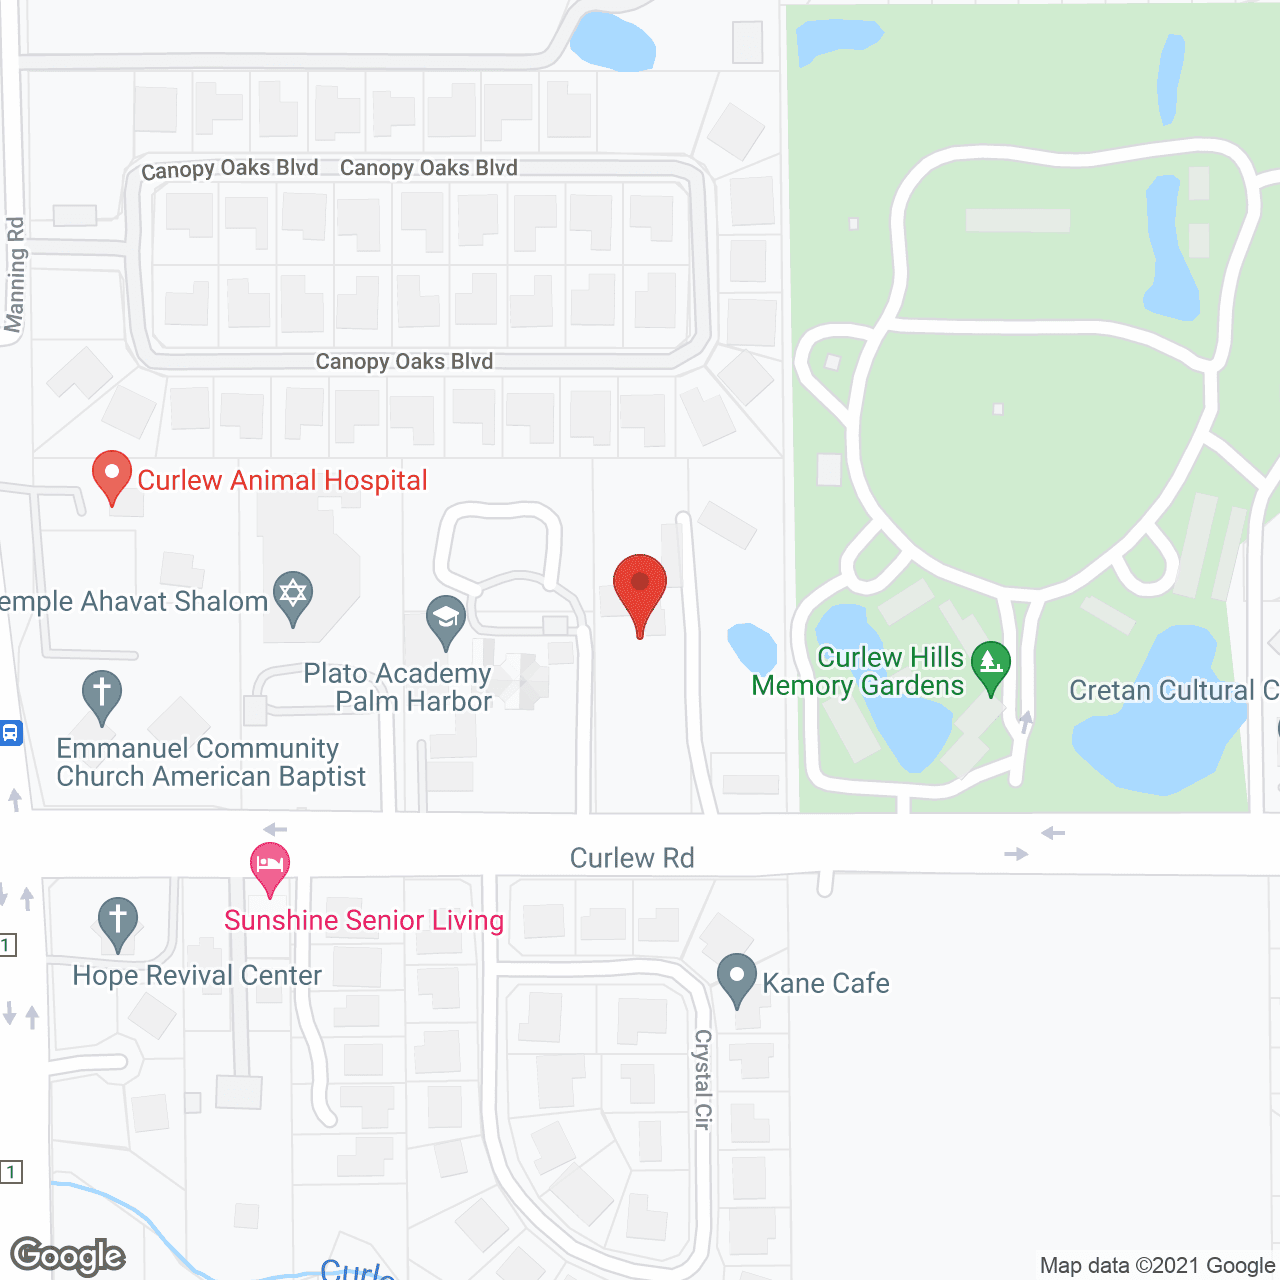 Allure of Palm Harbor in google map